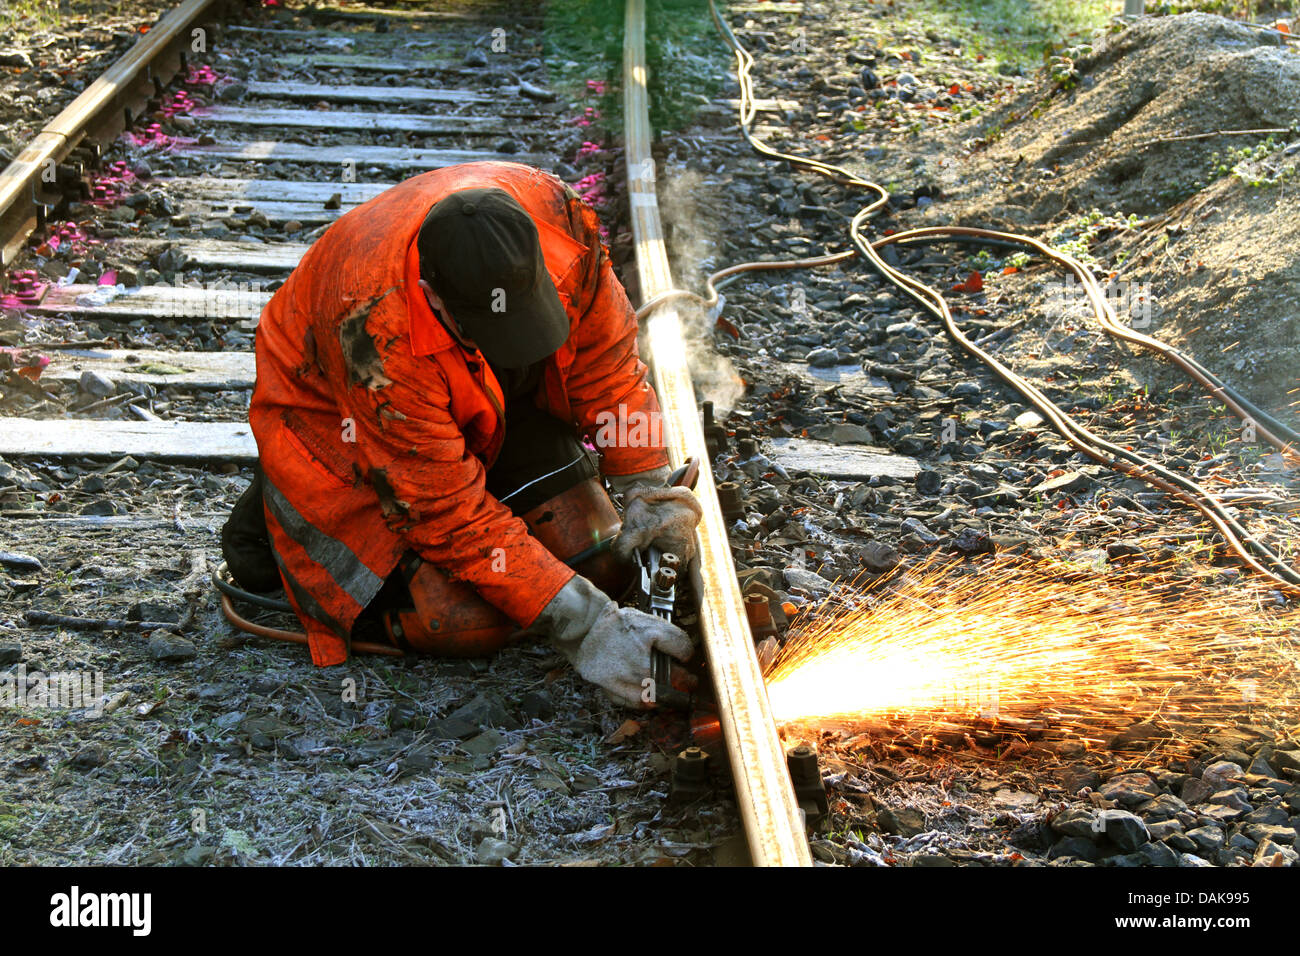 railway worker cutting with blowpipe a railway track, Germany Stock Photo